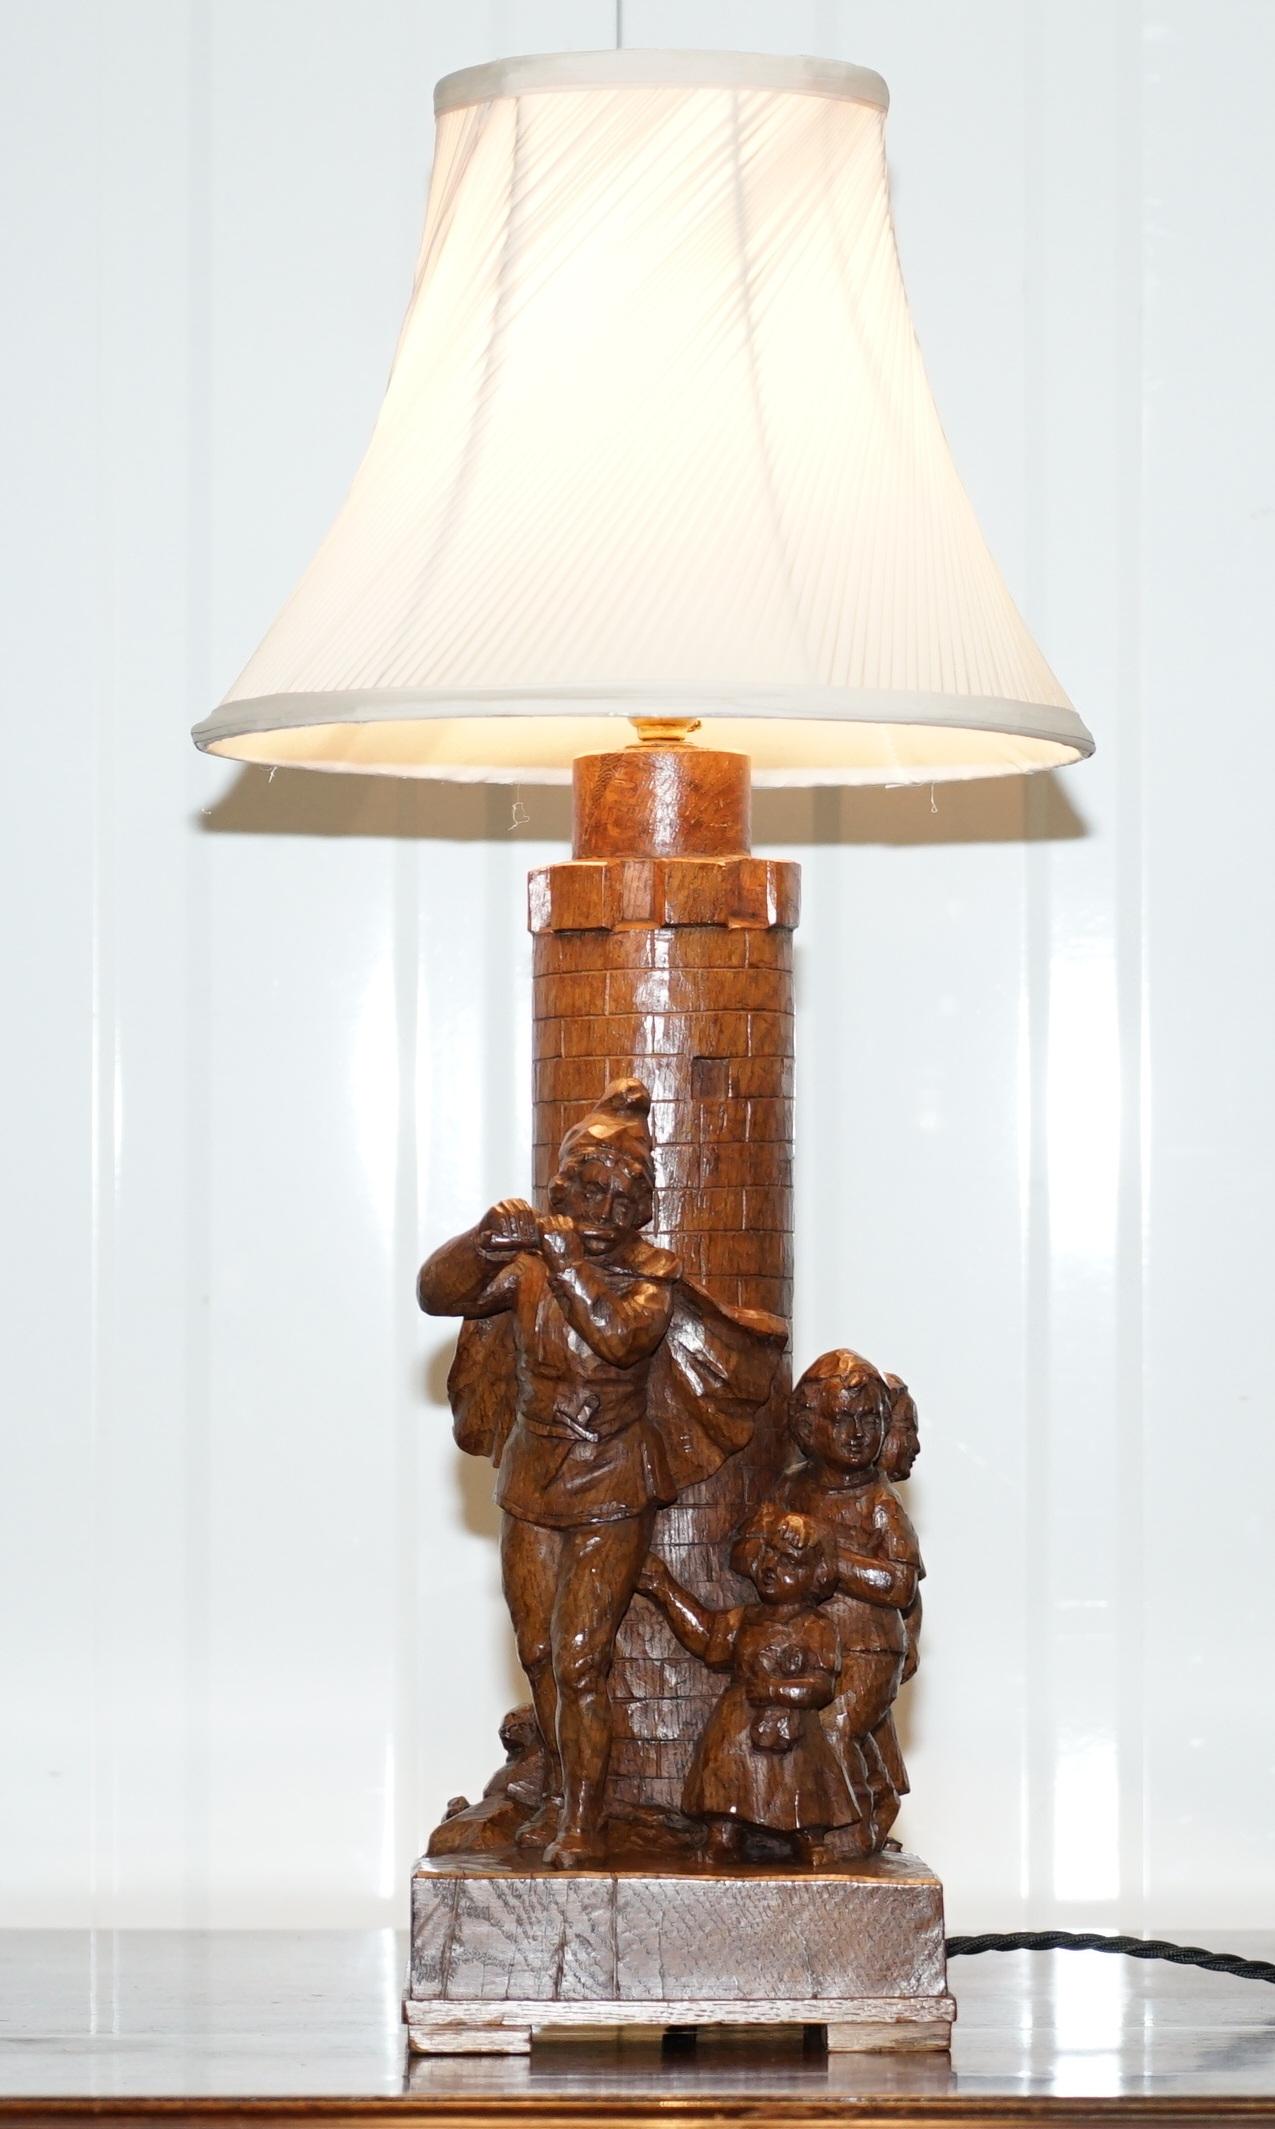 English Rare Pied Piper of Hamelin Black Forest Carved Wood Arts & Crafts Table Lamp